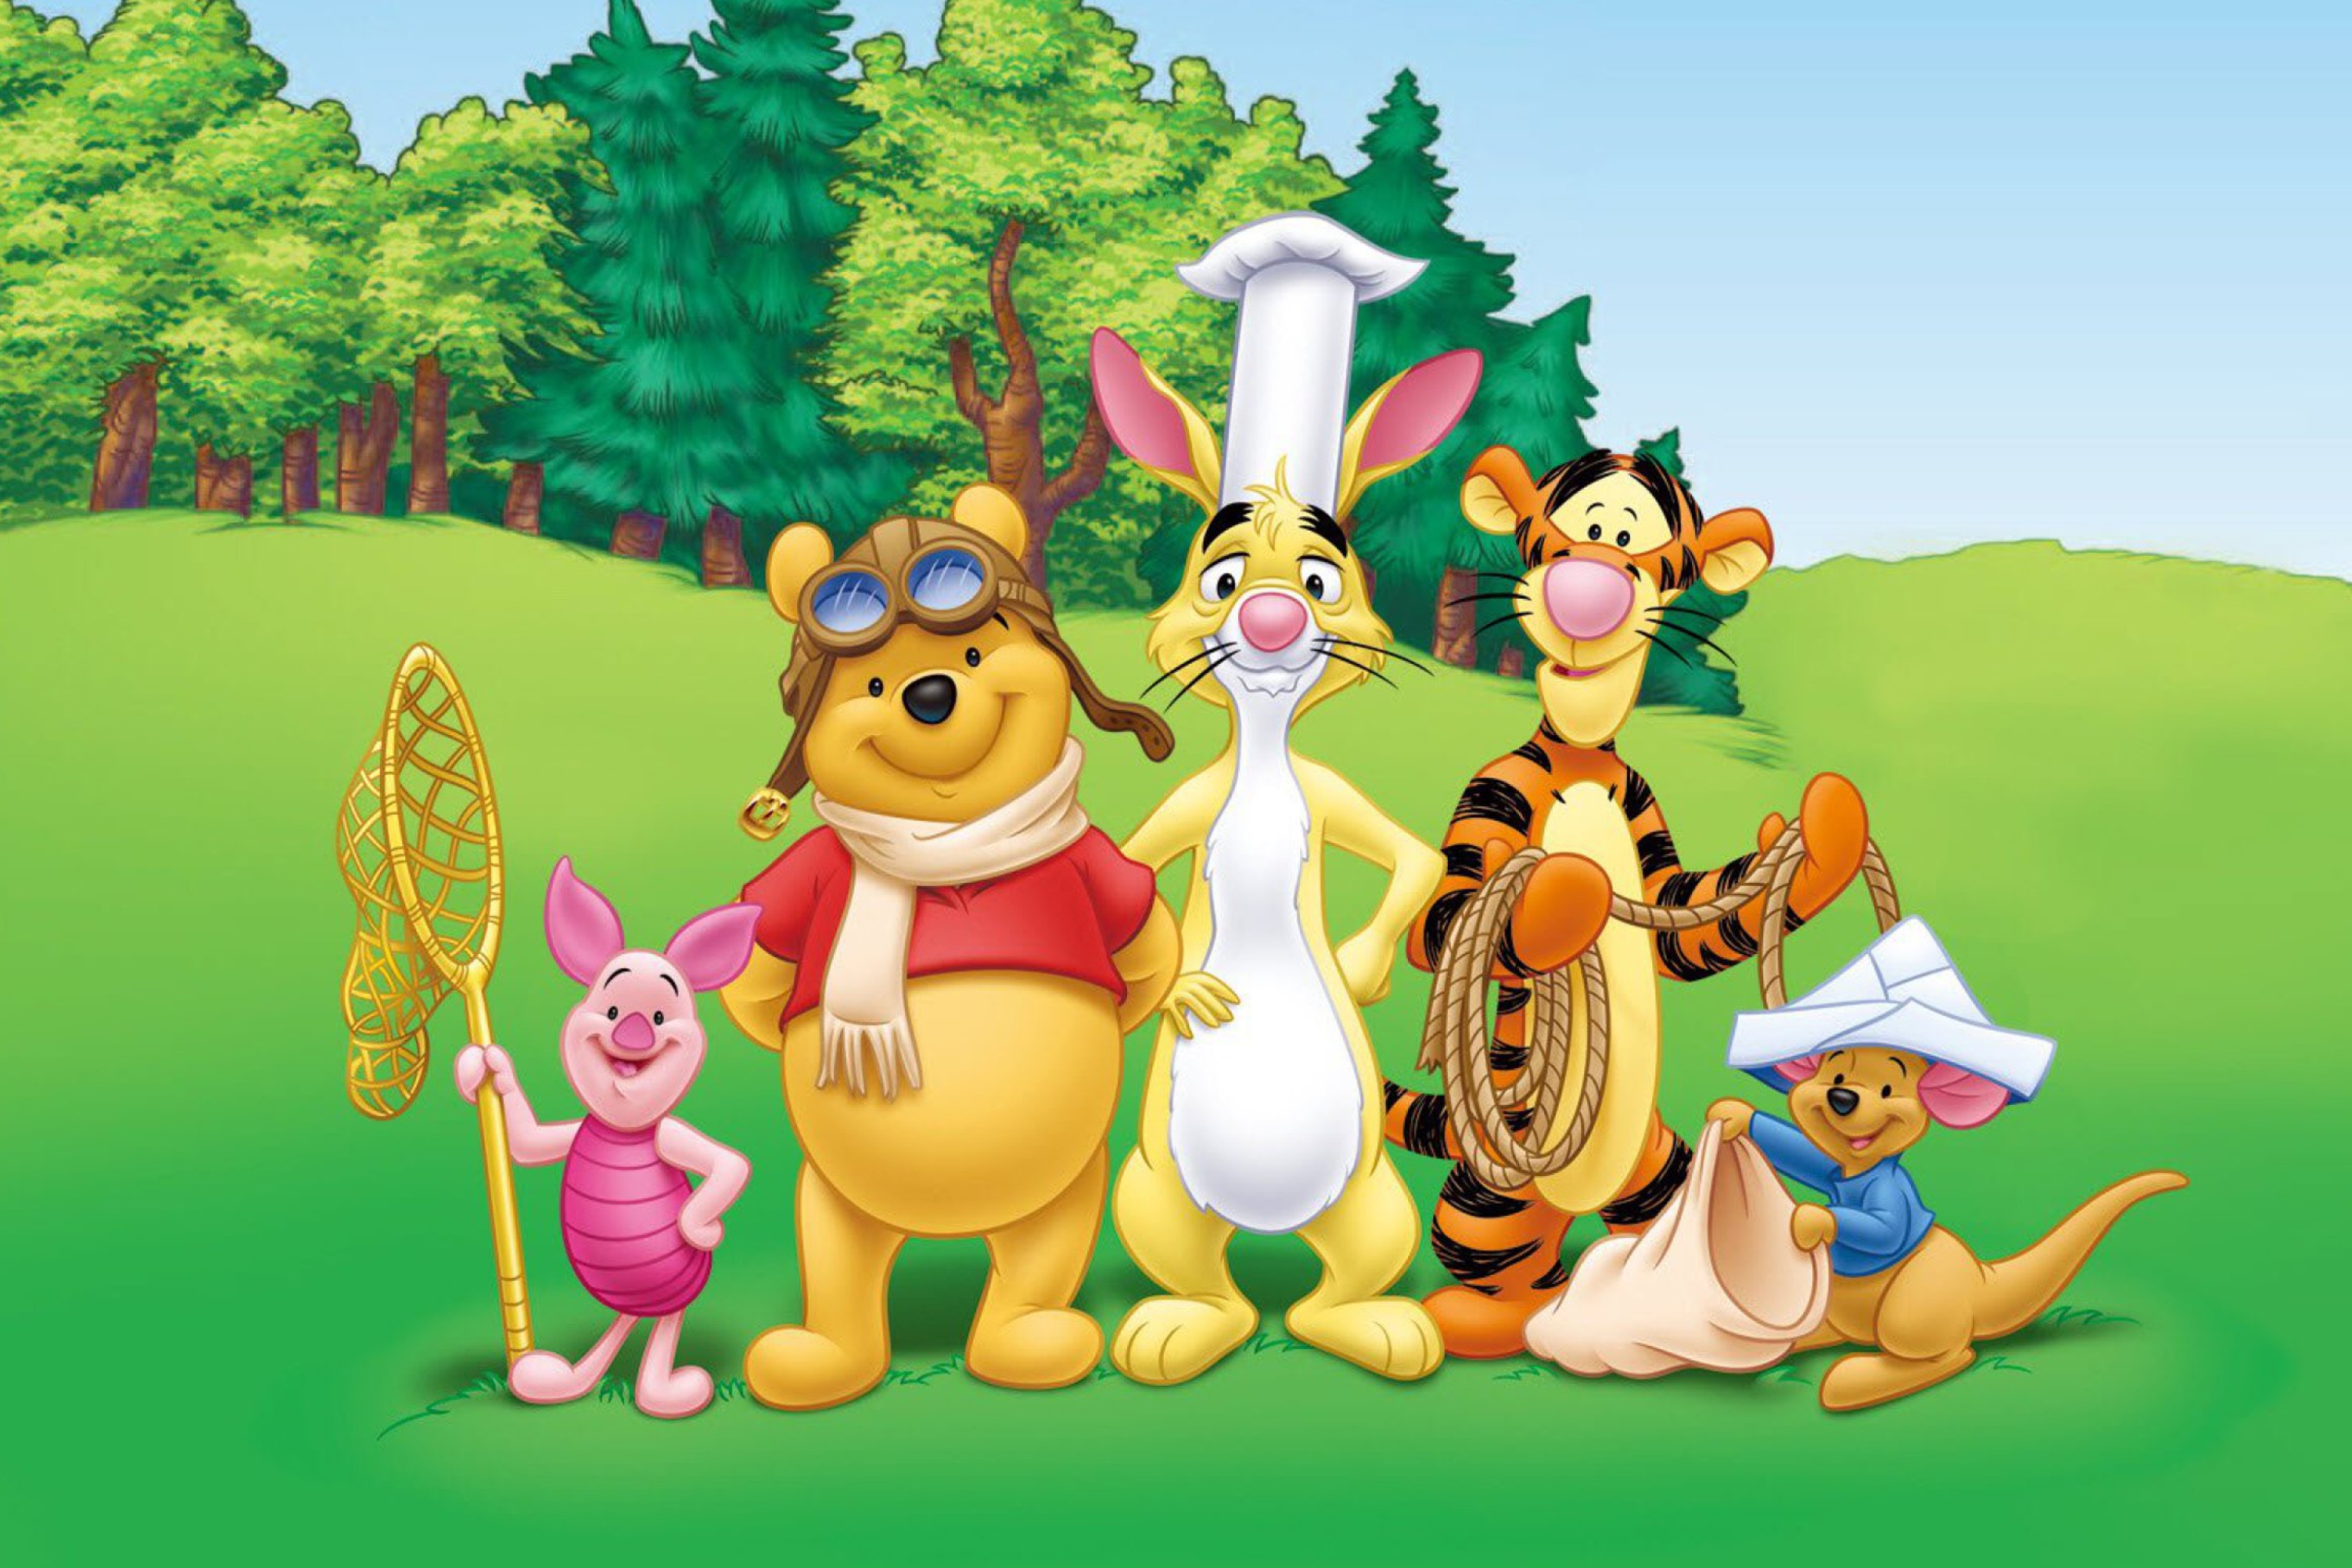 Das Pooh and Friends Wallpaper 2880x1920